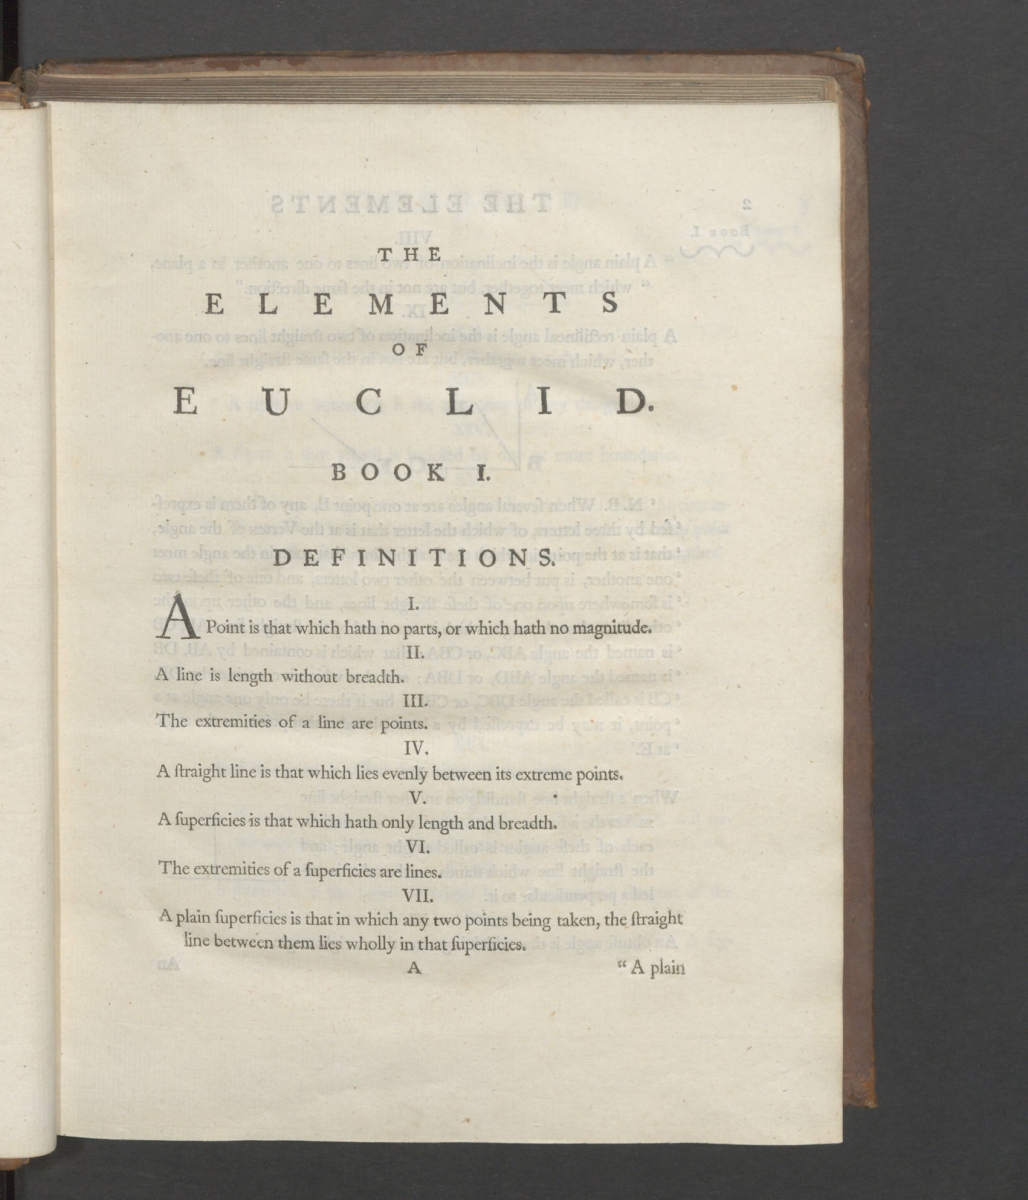 Page 1 of Robert Simson's 1756 The Elements of Euclid.